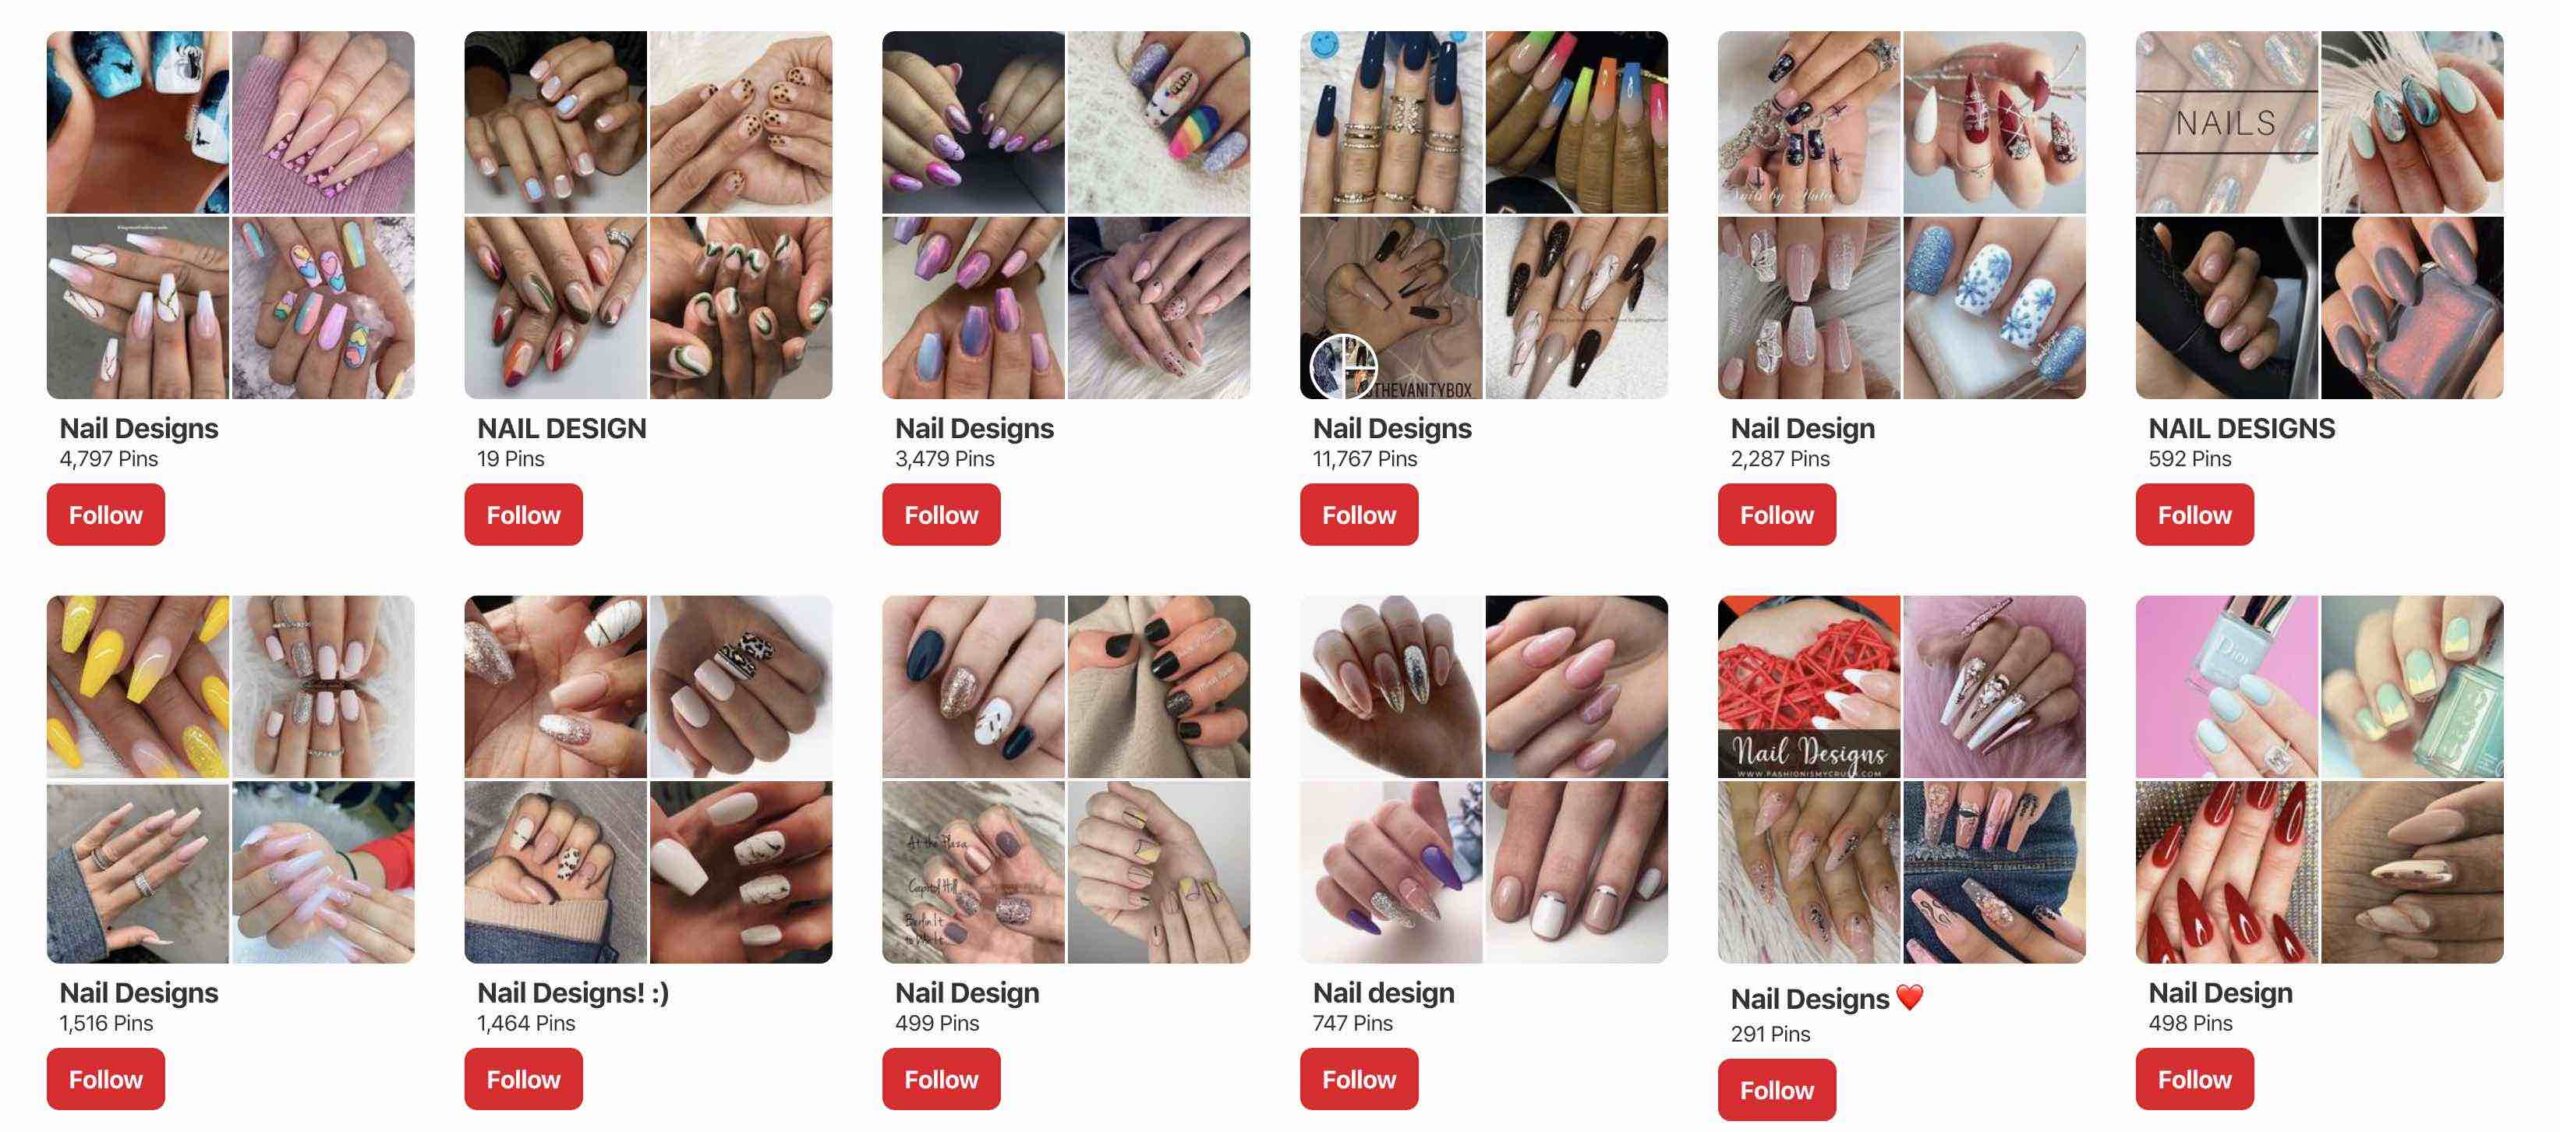 Similarly, if we search for nail designs and drop down the menu to show people, we see profiles who also rank for Nail Design.